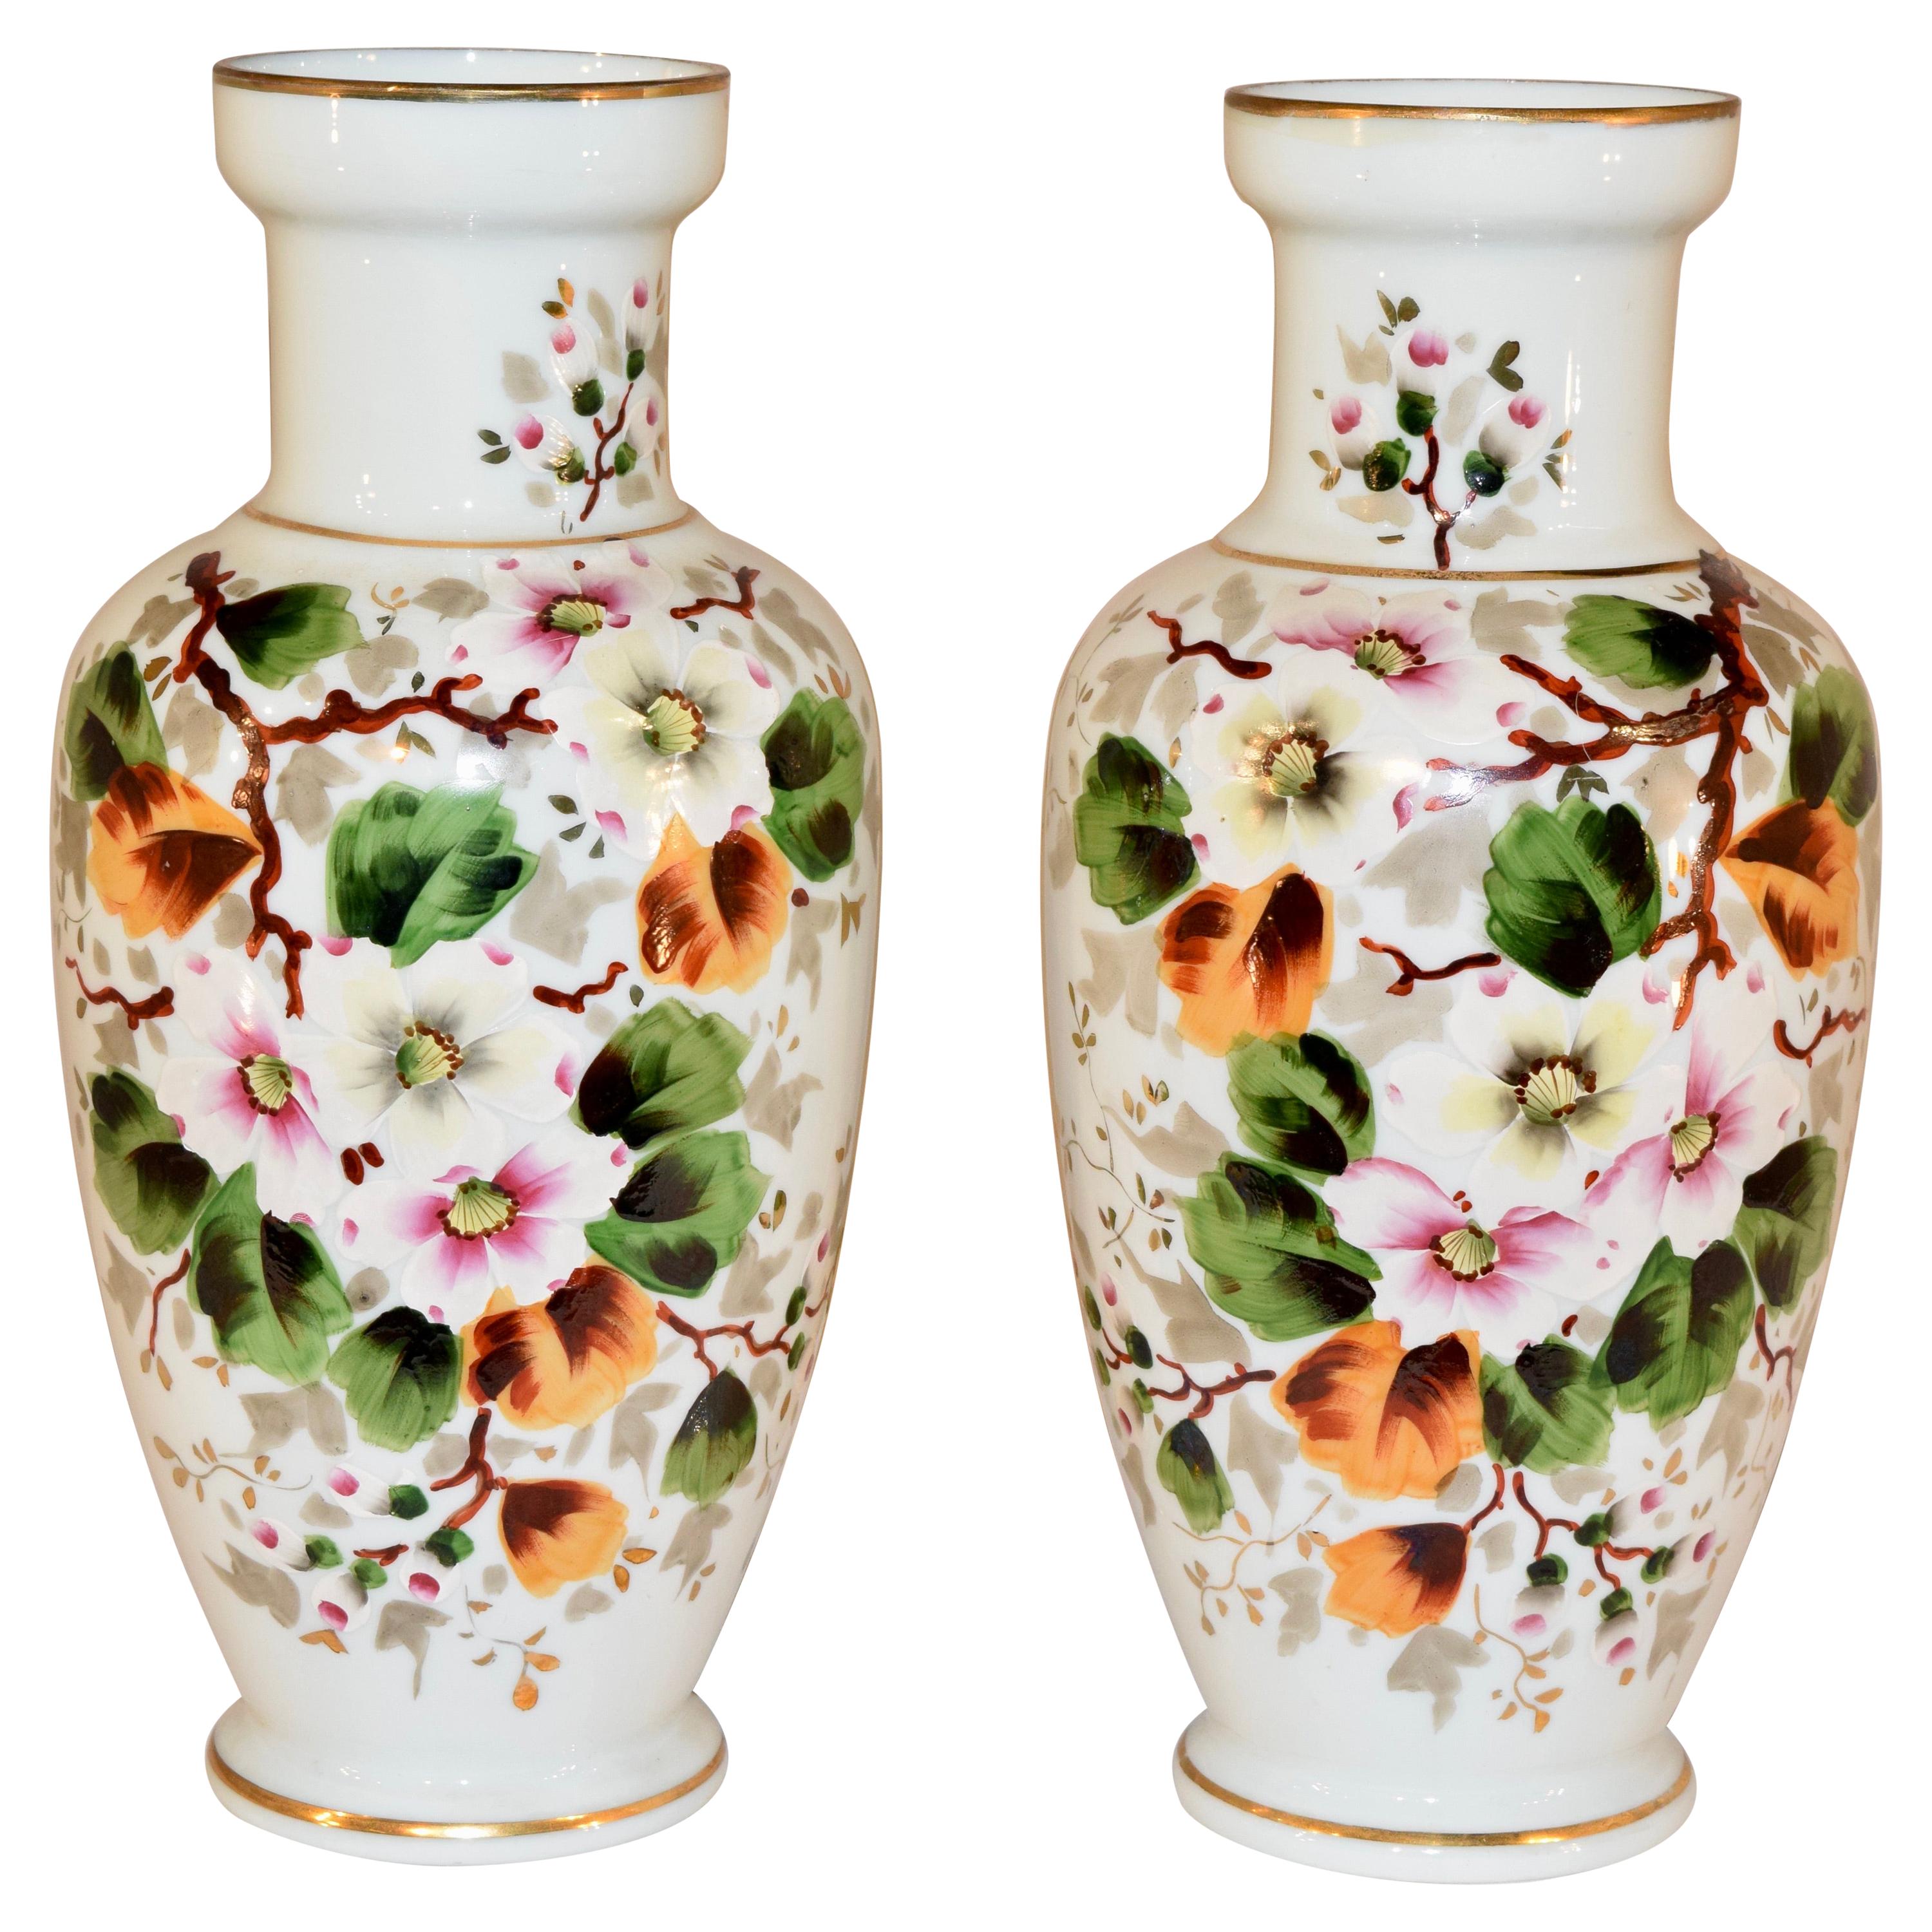 Pair of Late 19th Century Opaline Glass Vases